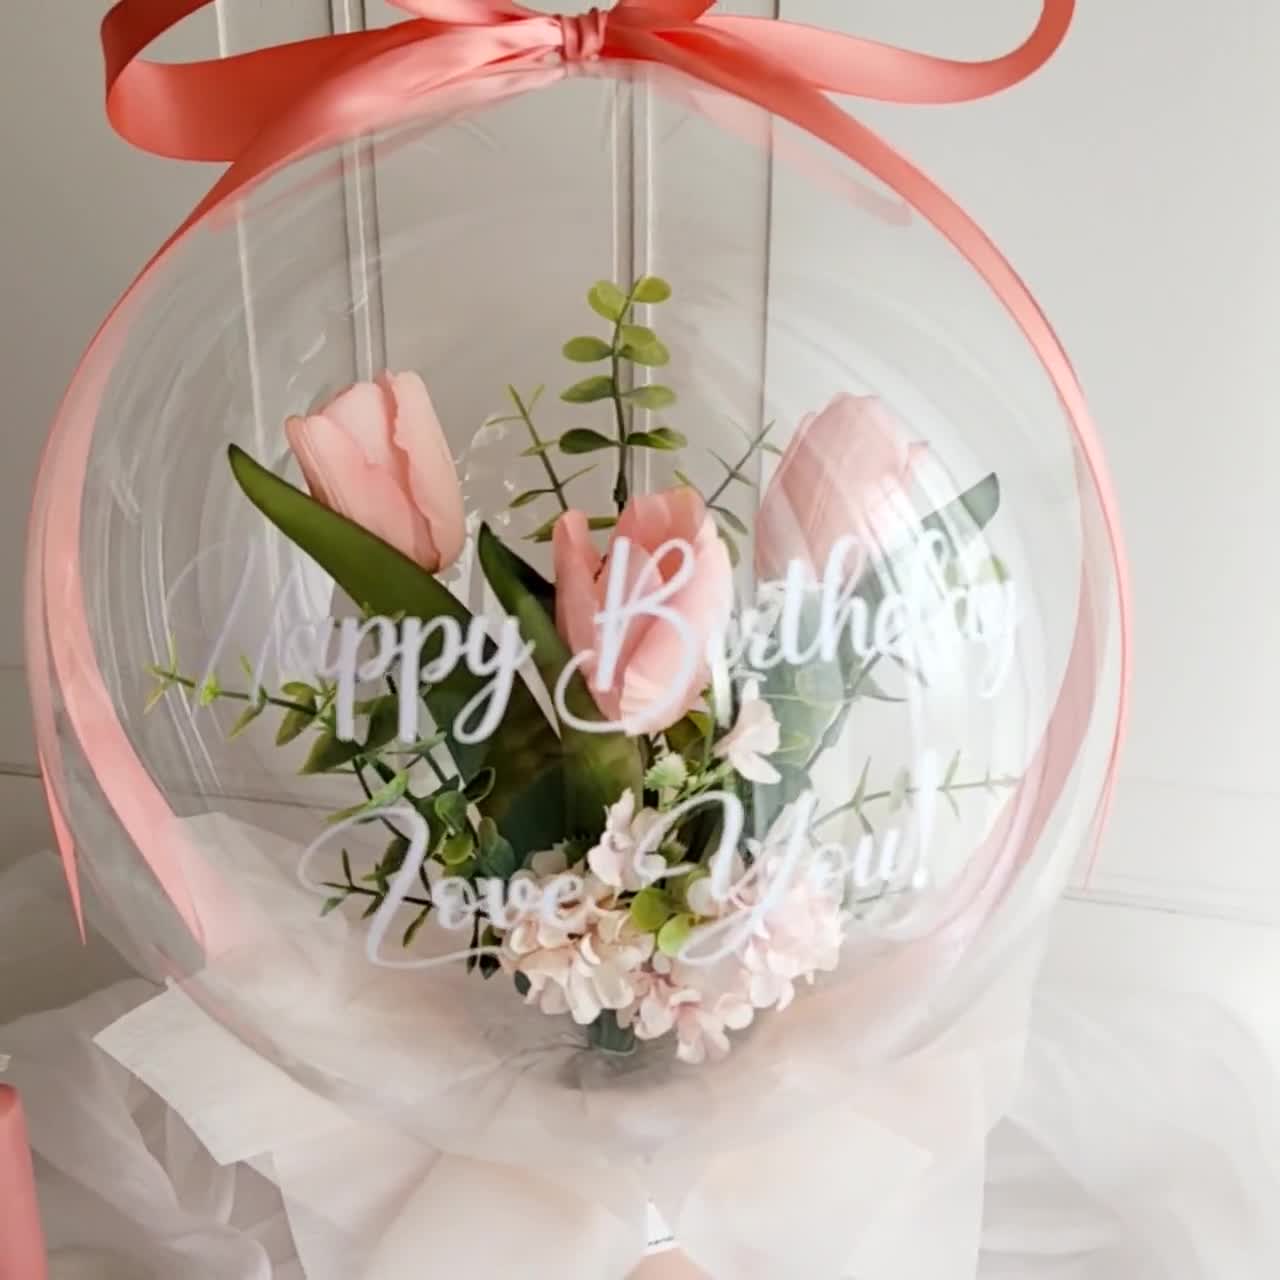 Creating Memories NY - Magical Butterfly balloon bouquet!!! 🎈🎈🎈🎈 Never  stop celebrating your loved ones!! Good moments are treasures that live  forever in our minds!!! 🥰🤩🥰🎈🥰🤩🥰 Order your balloon walls,bouquets,  garlands, columns